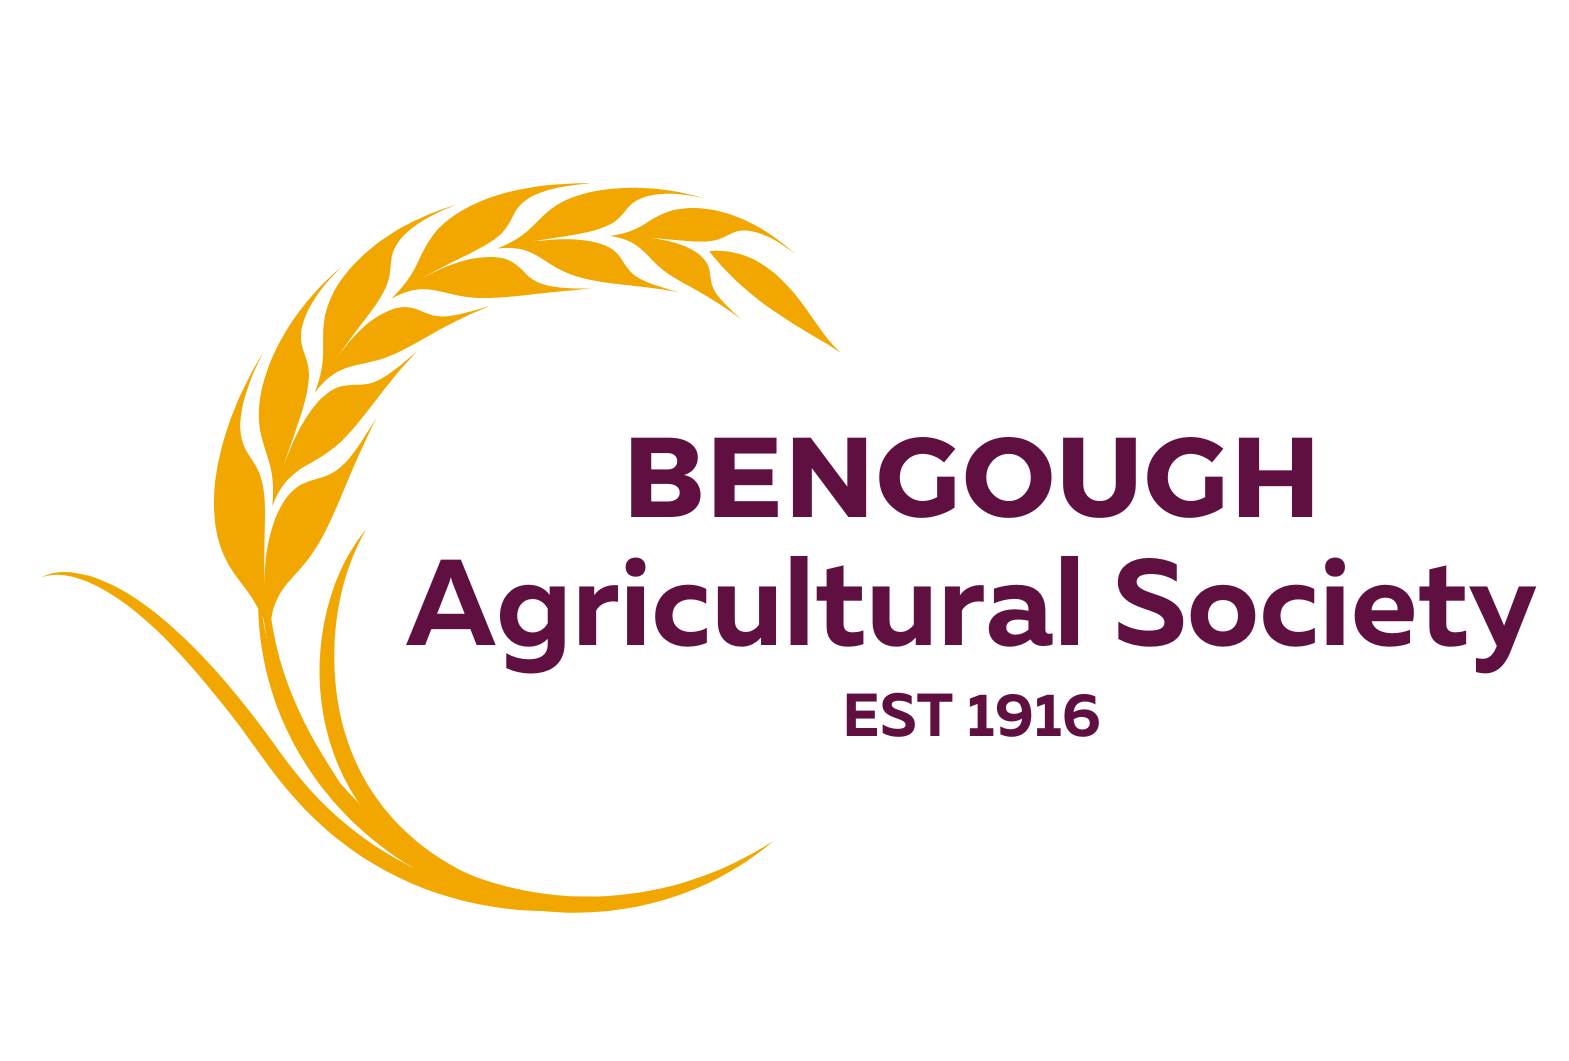 Wheat stalk curved around text, Bengough Agricultural Society Est 1916